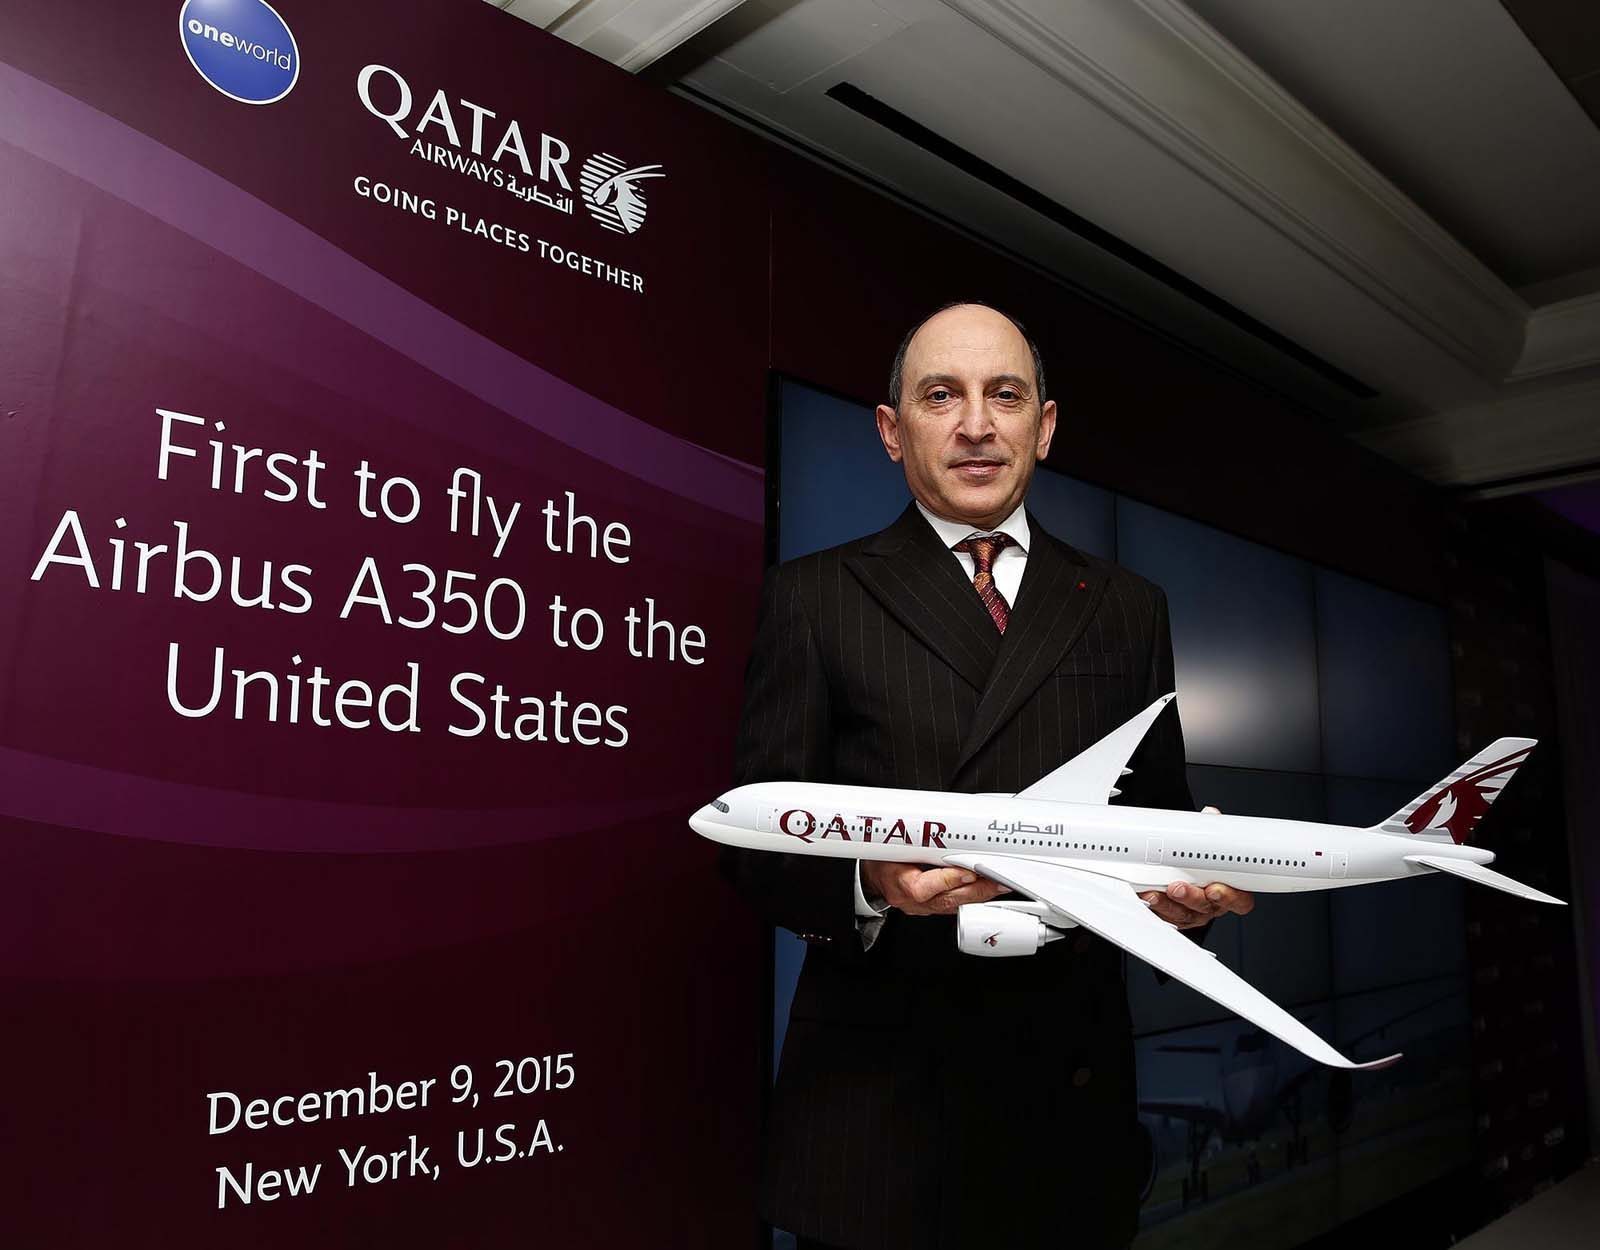 Akbar Al Baker at the launch of A350 services to the USA in December 2015